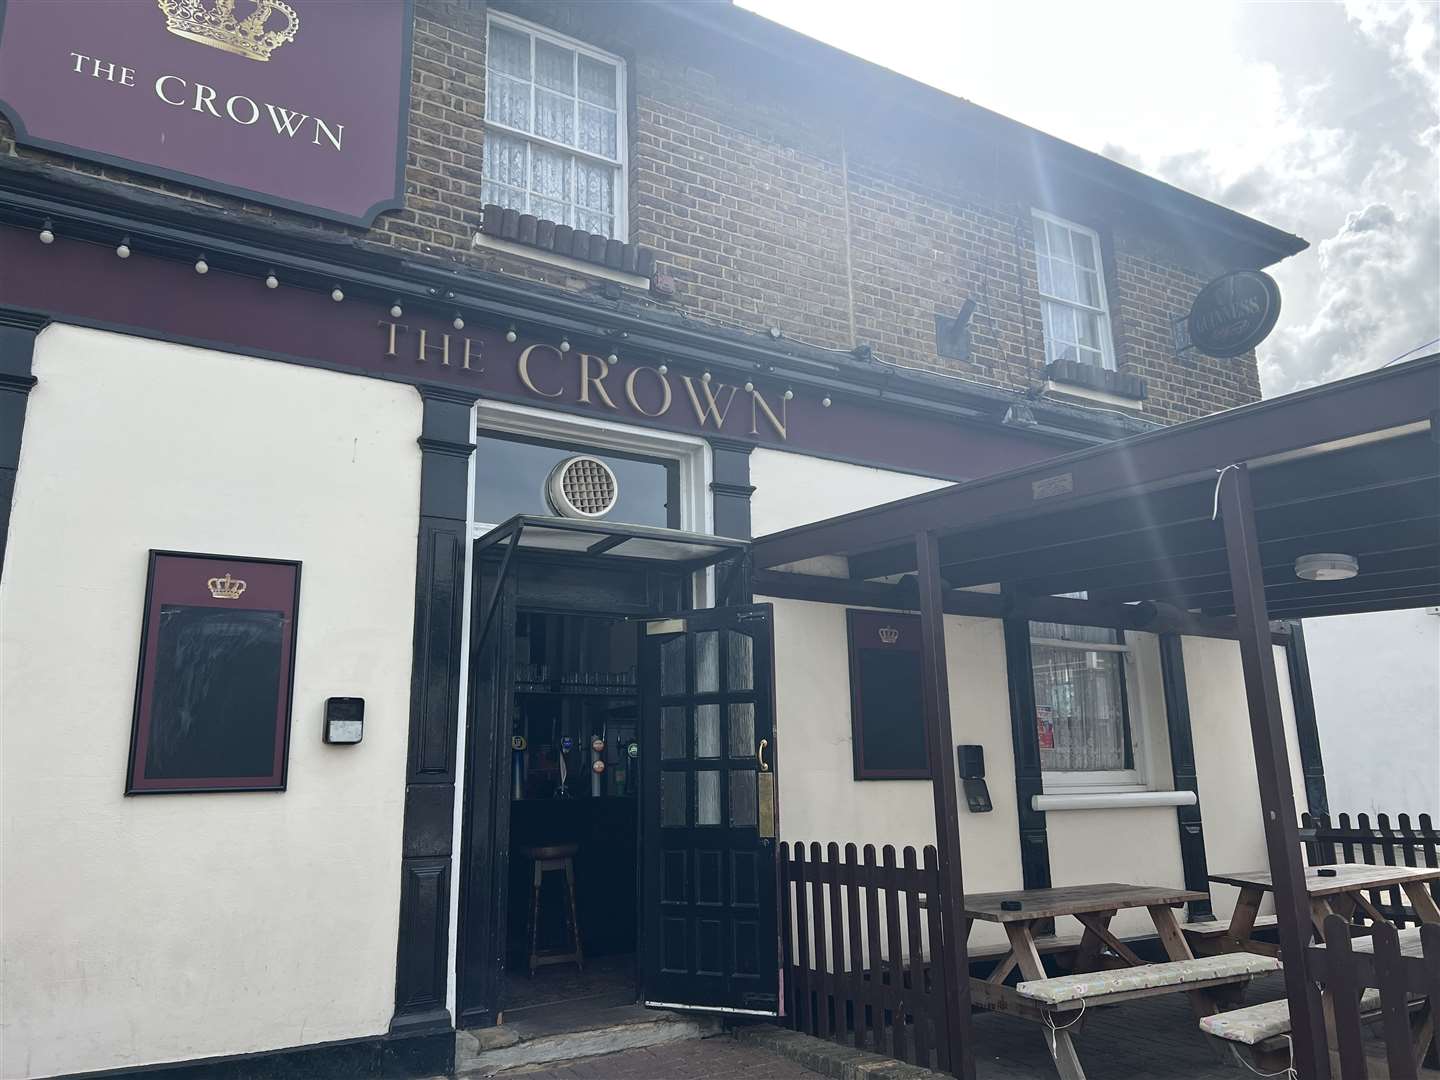 The Crown pub in Perry Street